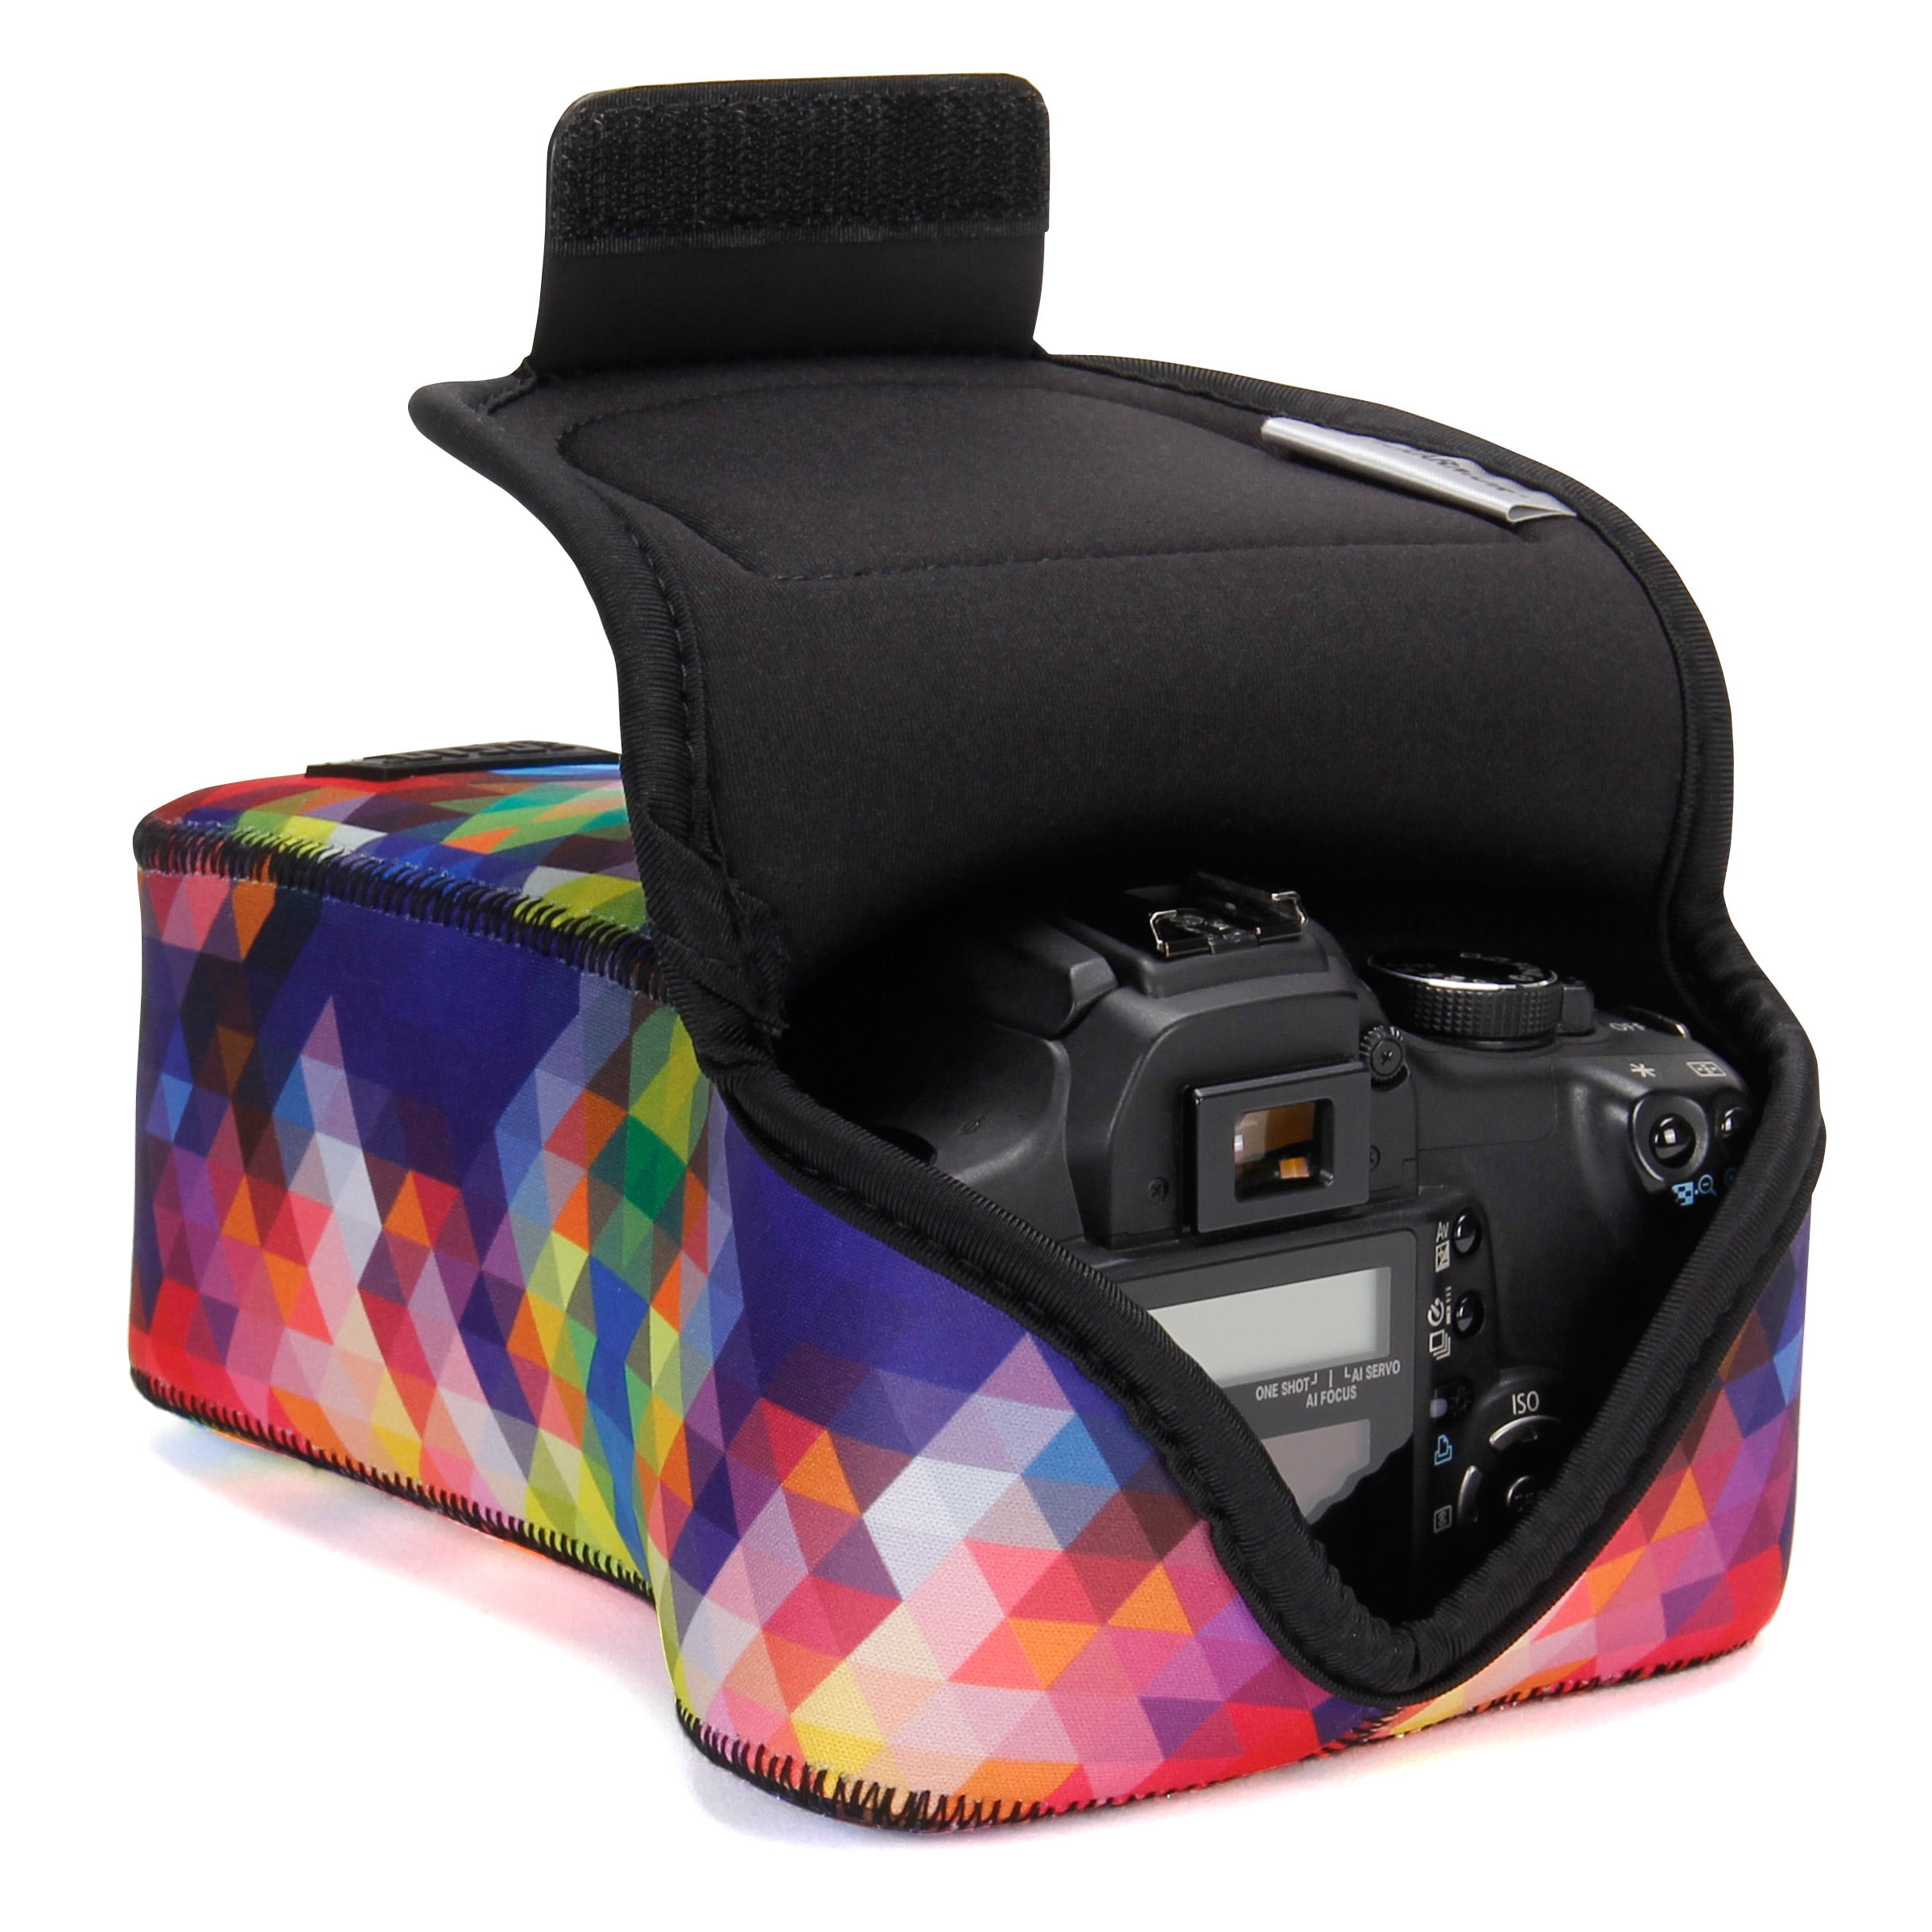 Floral Compatible with Nikon D3400 with Neoprene Protection Pentax K-70 and Many More USA GEAR DSLR Camera Sleeve Case Canon EOS Rebel SL2 Holster Belt Loop and Accessory Storage 